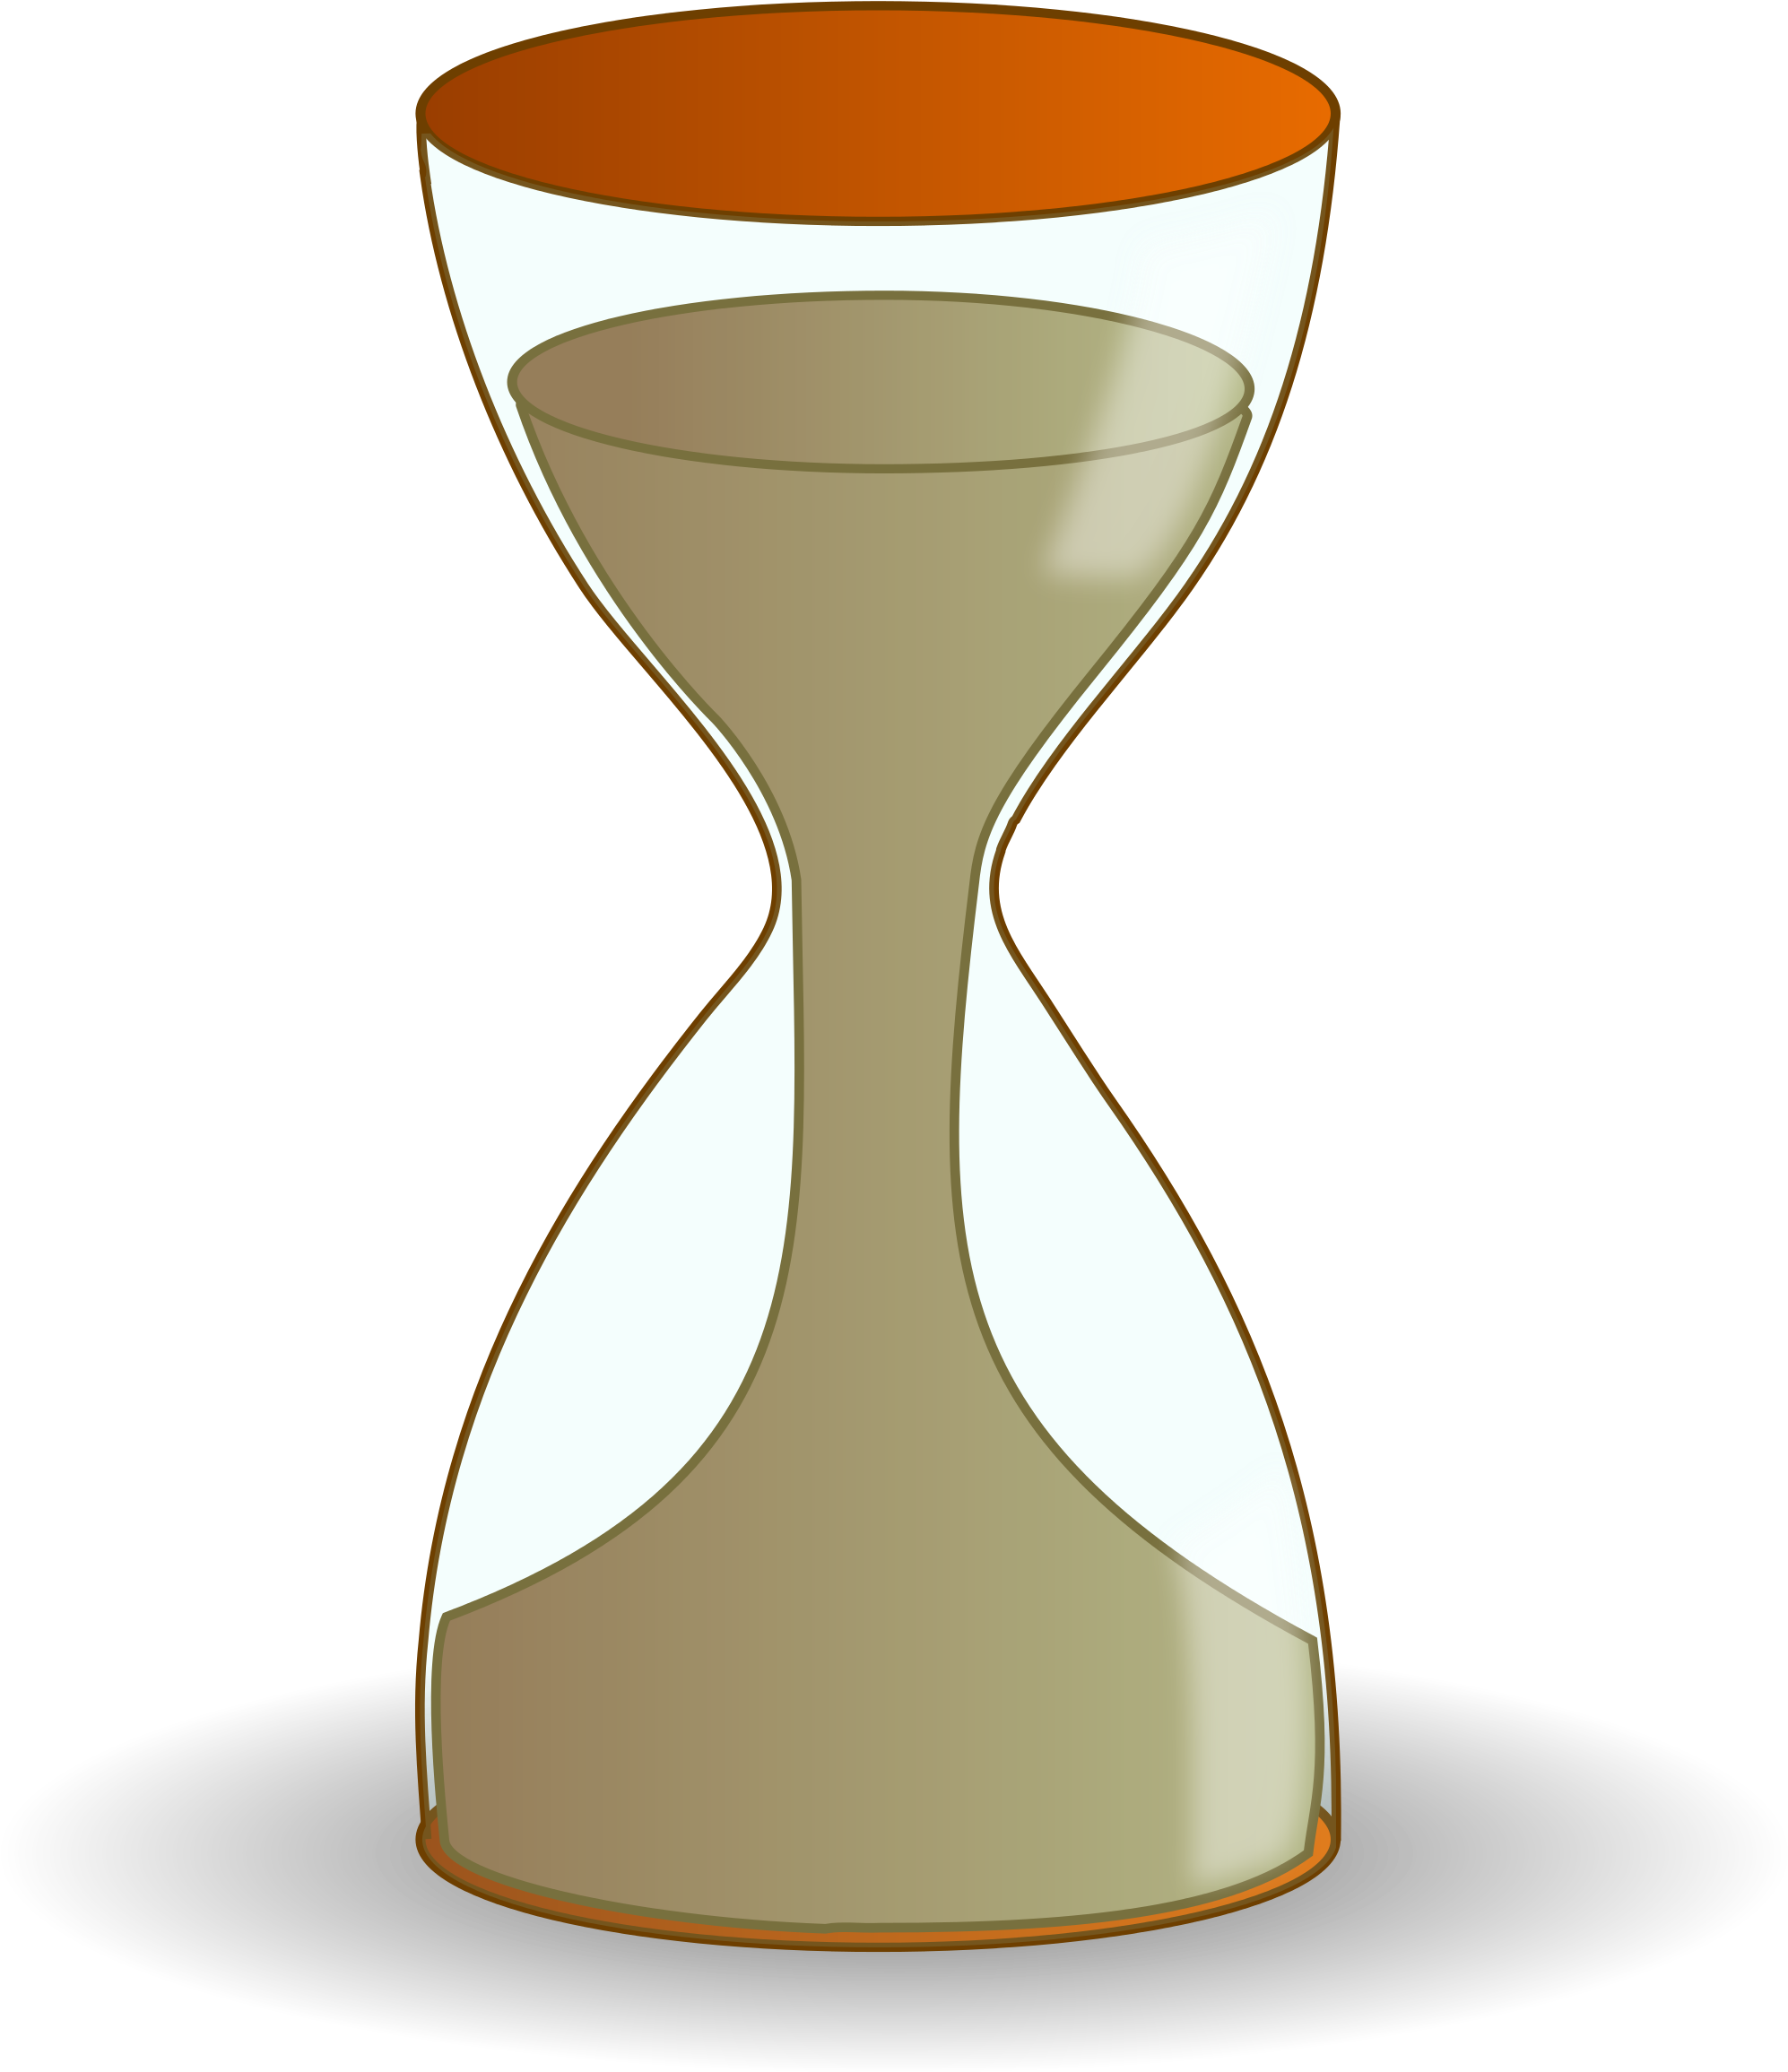 A Sand Glass With A Black Background